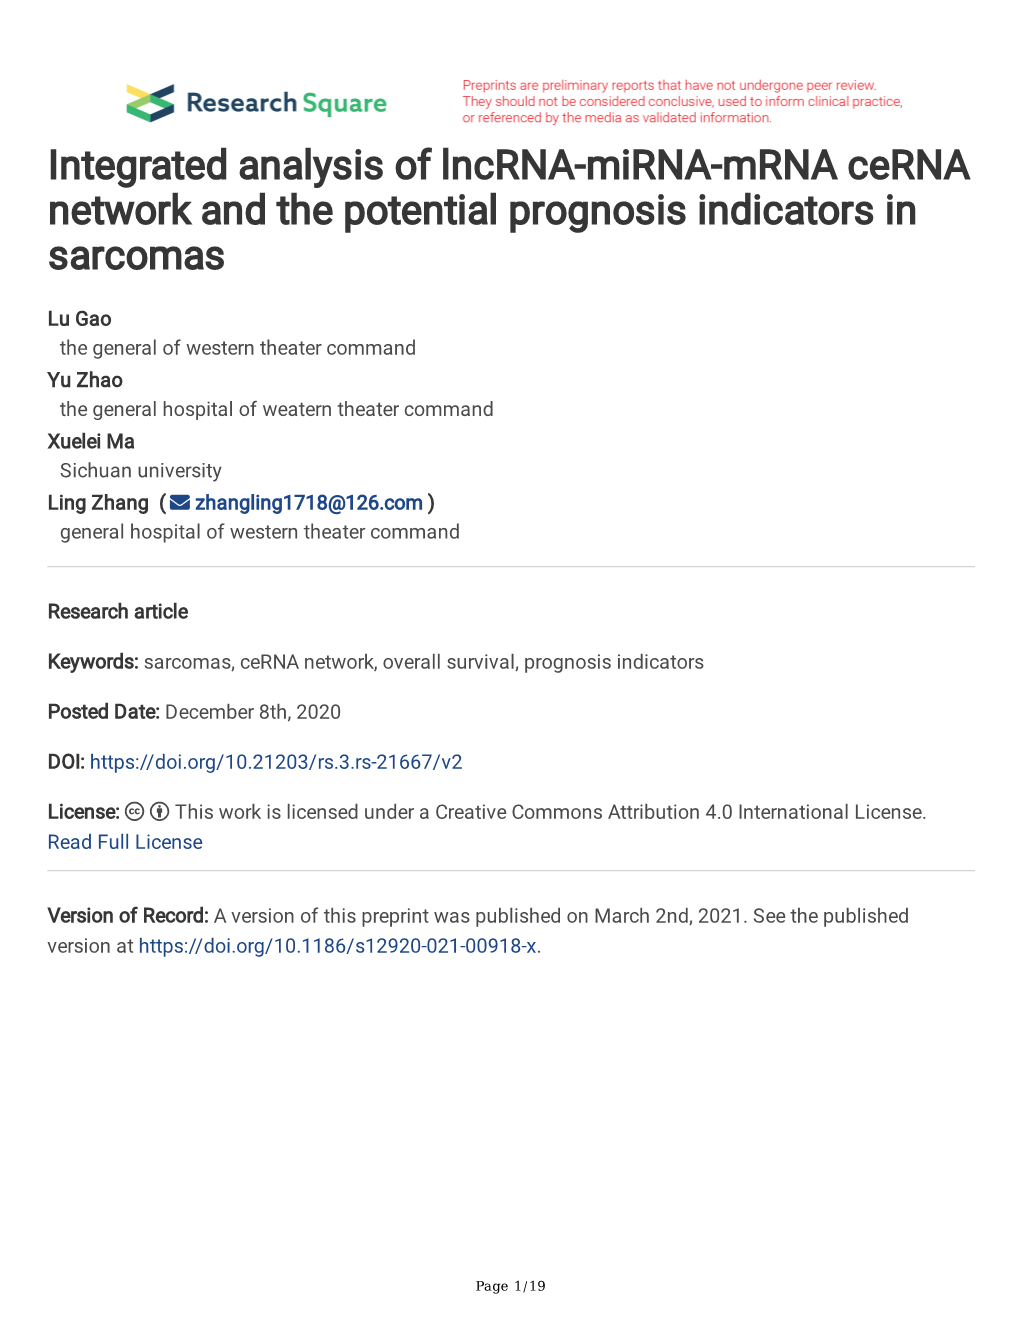 Integrated Analysis of Lncrna-Mirna-Mrna Cerna Network and the Potential Prognosis Indicators in Sarcomas